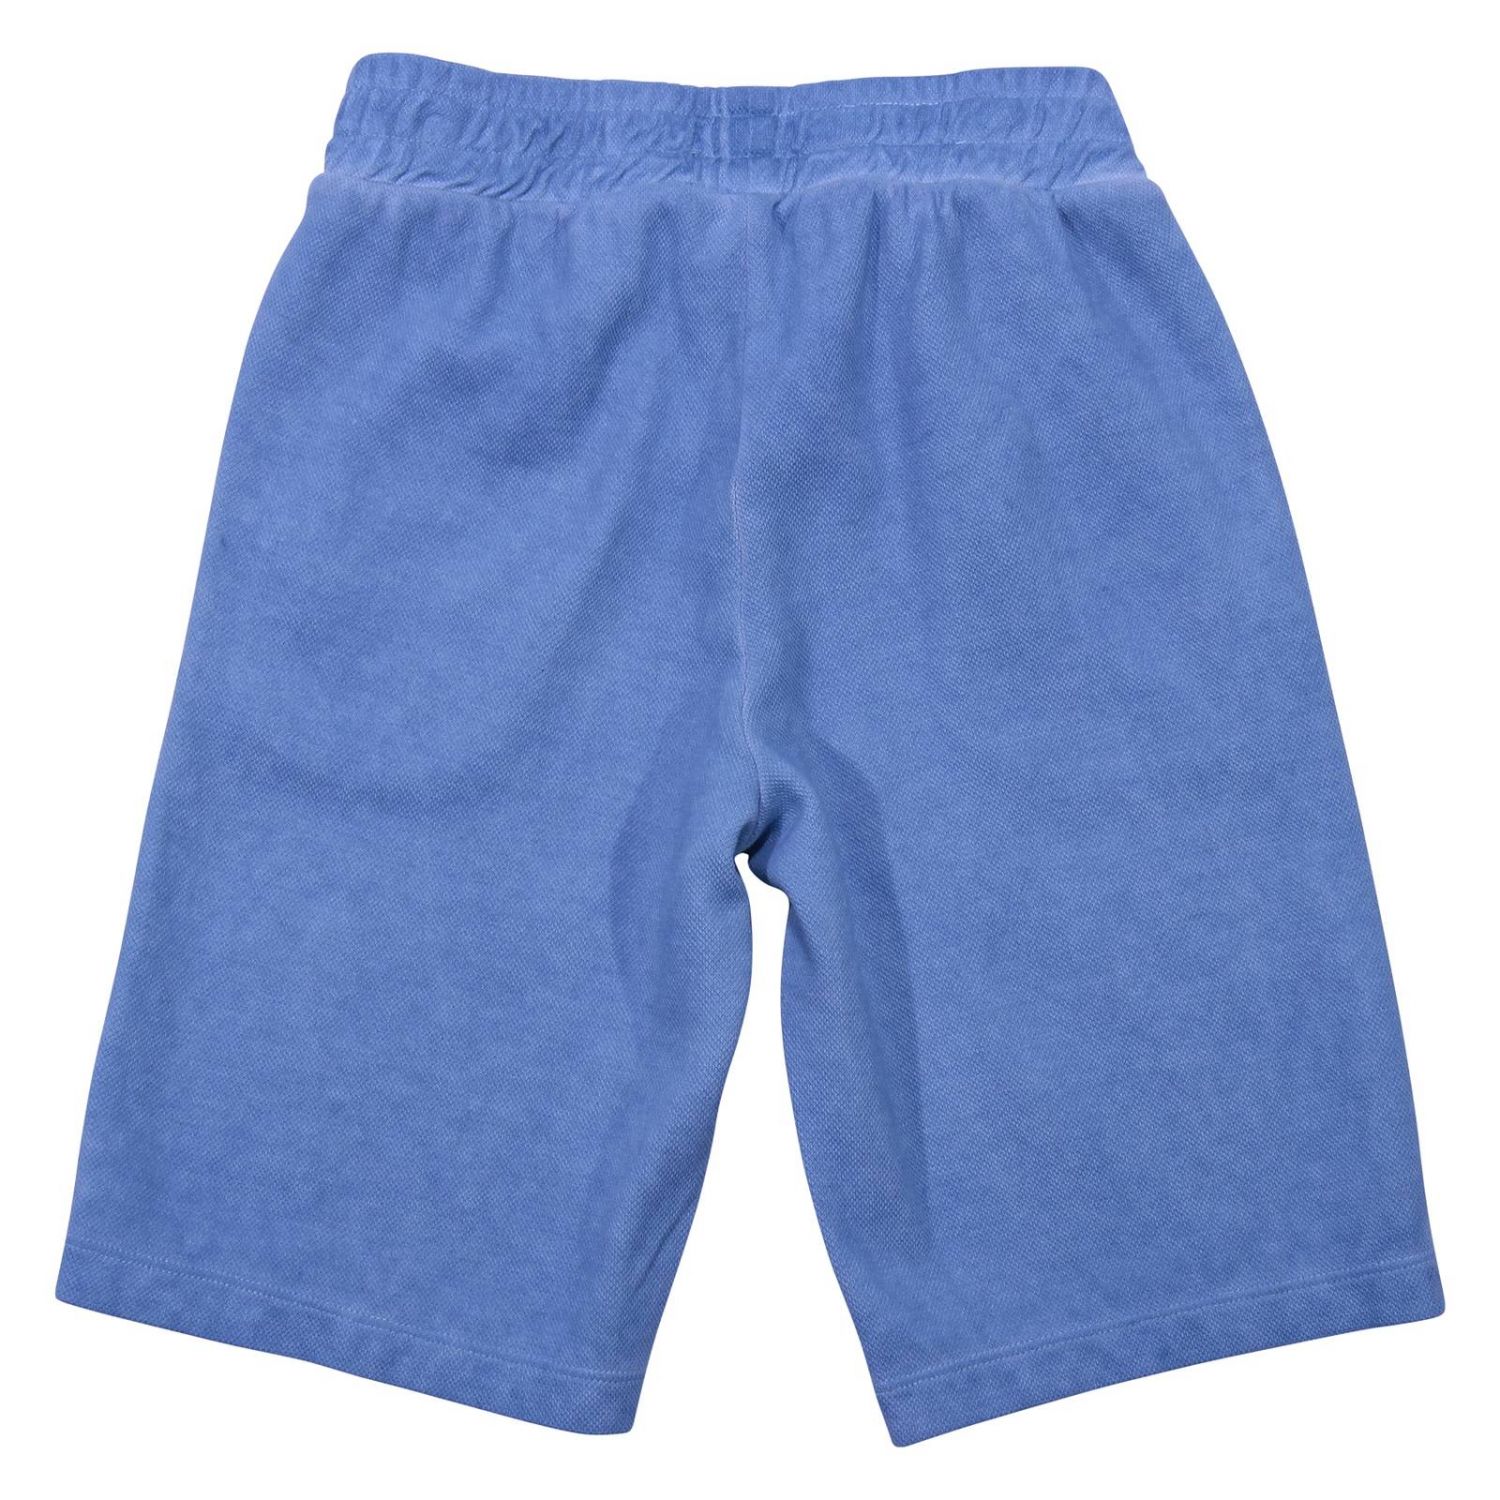 Moschino Kid Outlet: Shorts kids | Shorts Moschino Kid Kids Gnawed Blue ...